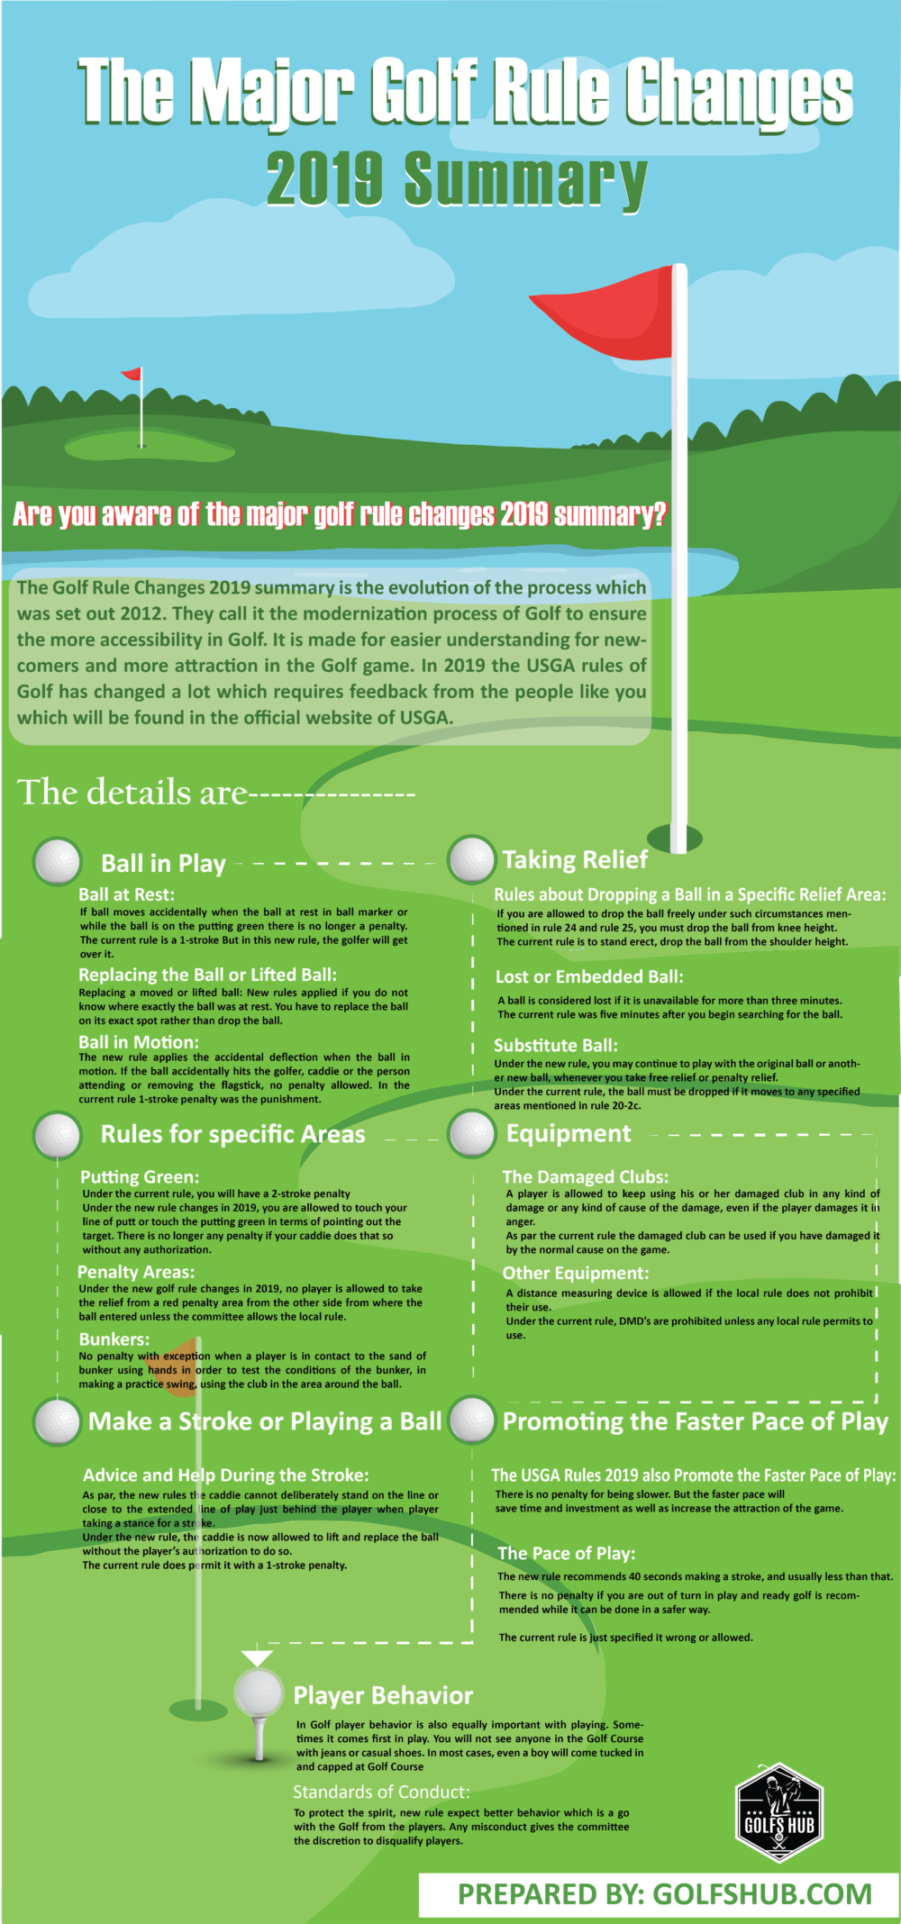 The Major Golf Rule Changes 2019 Summary